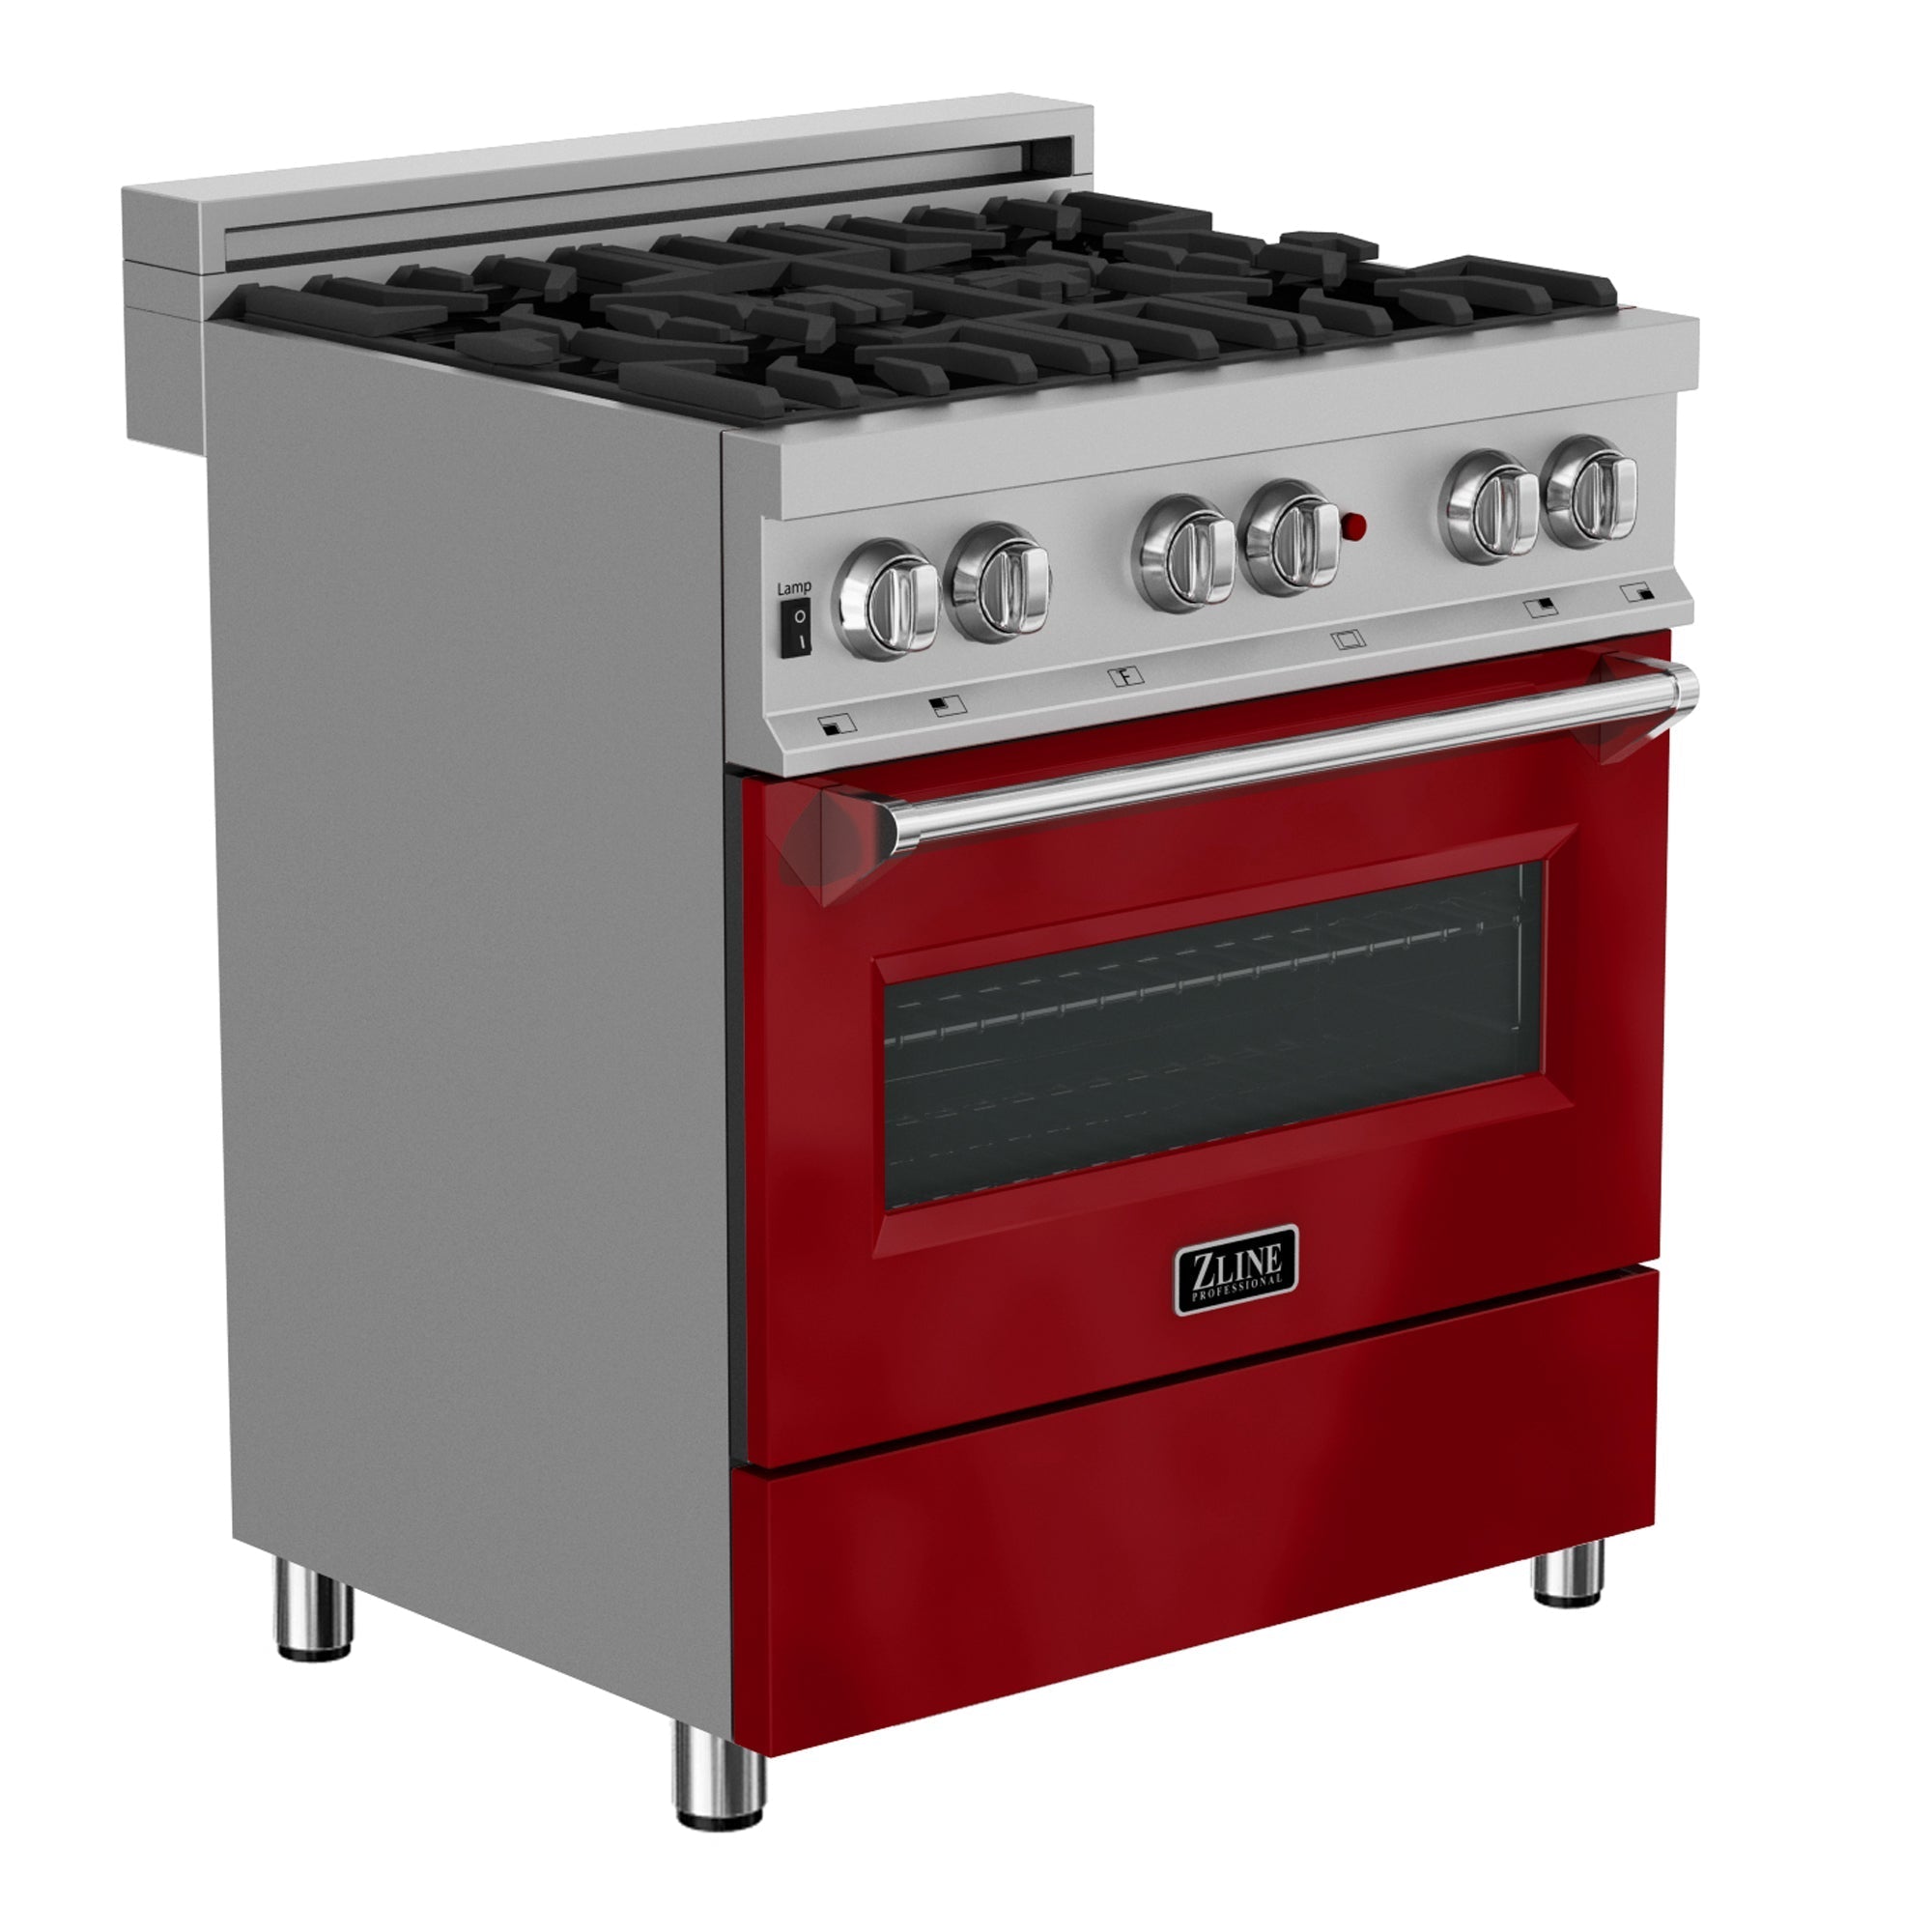 ZLINE 36" 4.6 cu. ft. Dual Fuel Range with Gas Stove and Electric Oven in Fingerprint Resistant Stainless Steel and Red Gloss Door (RAS-RG-36)